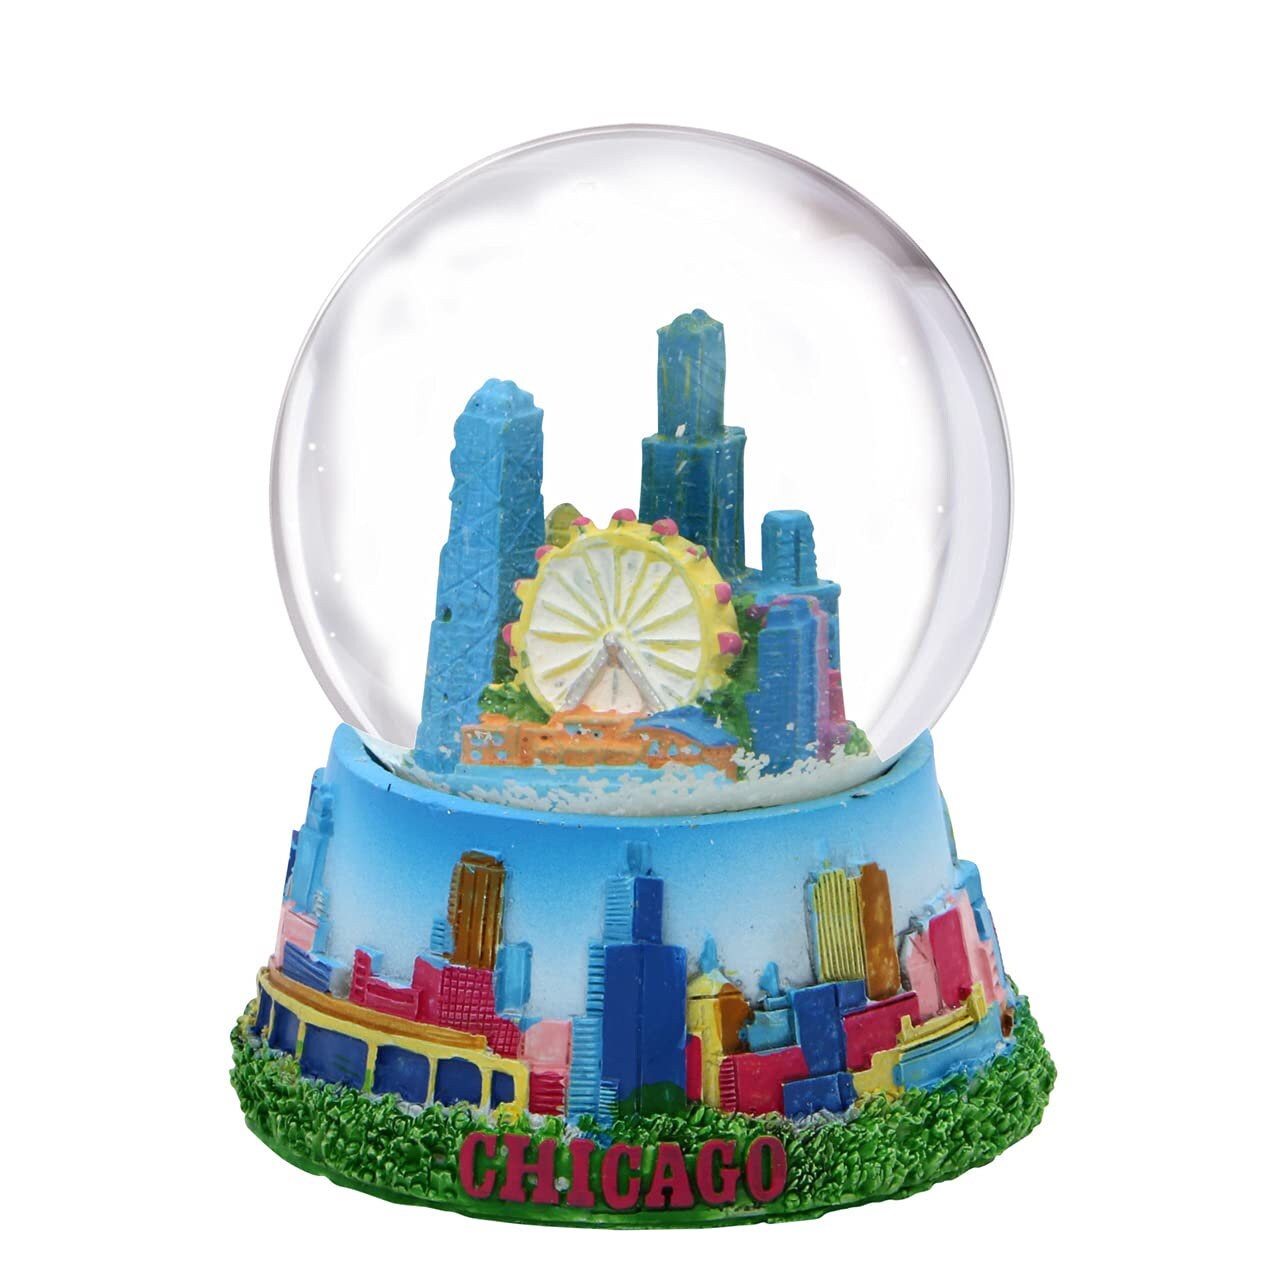 Chicago Gifts: Chicago Souvenirs, Chicago T-shirts, Chicago Cubs, Chicago  Bears & Chicago Snow Globes